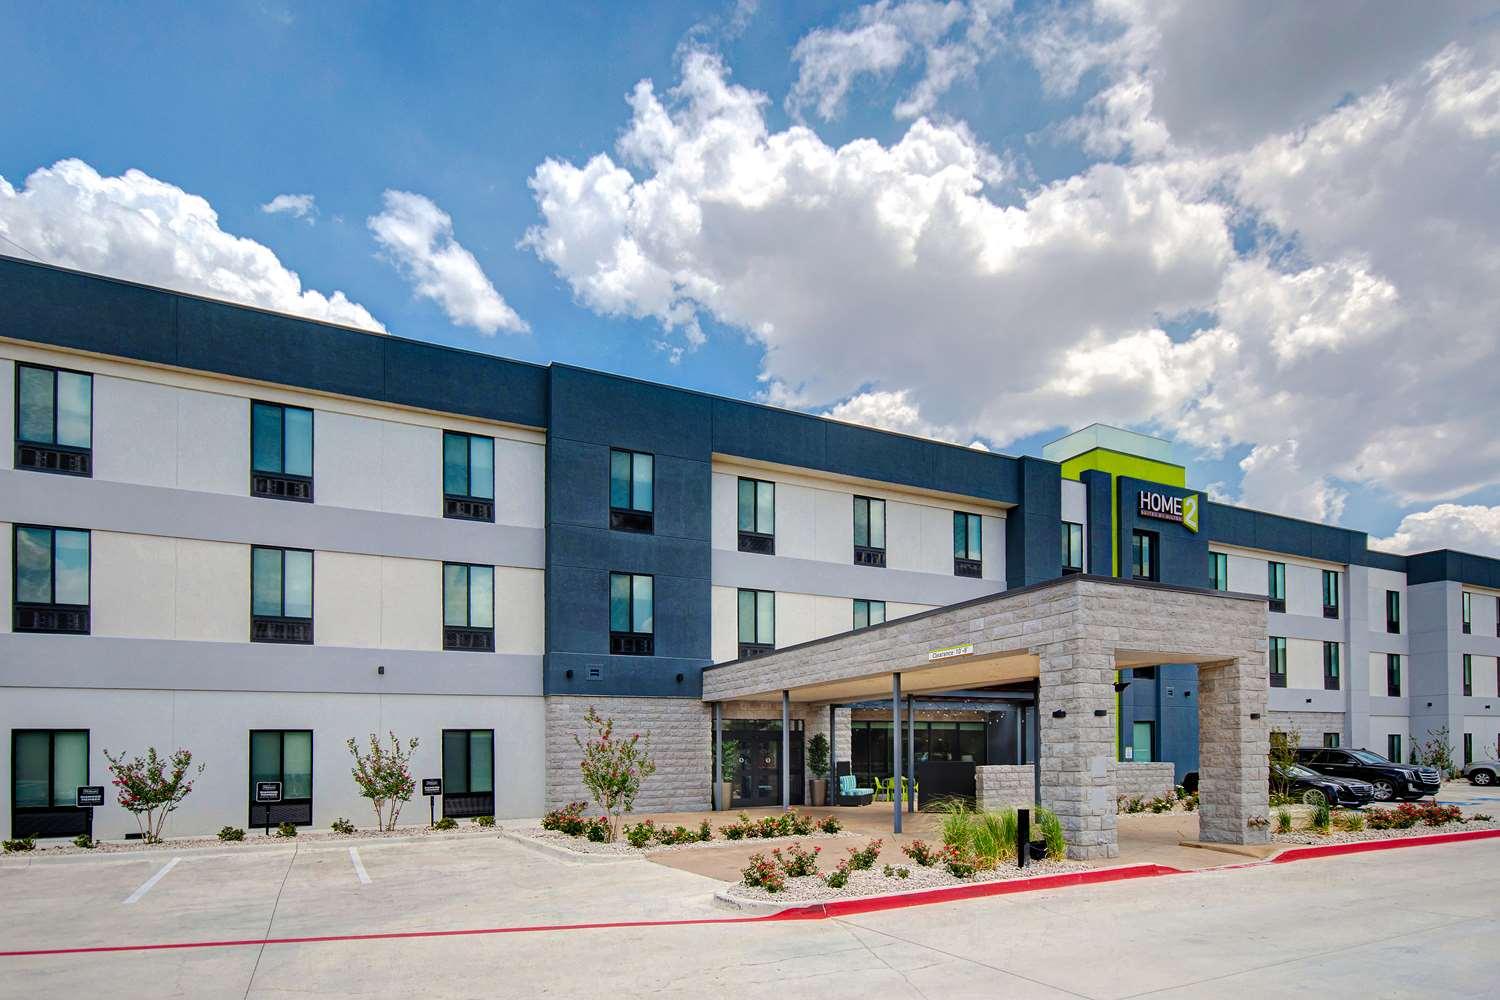 Home2 Suites by Hilton Burleson in Burleson, TX